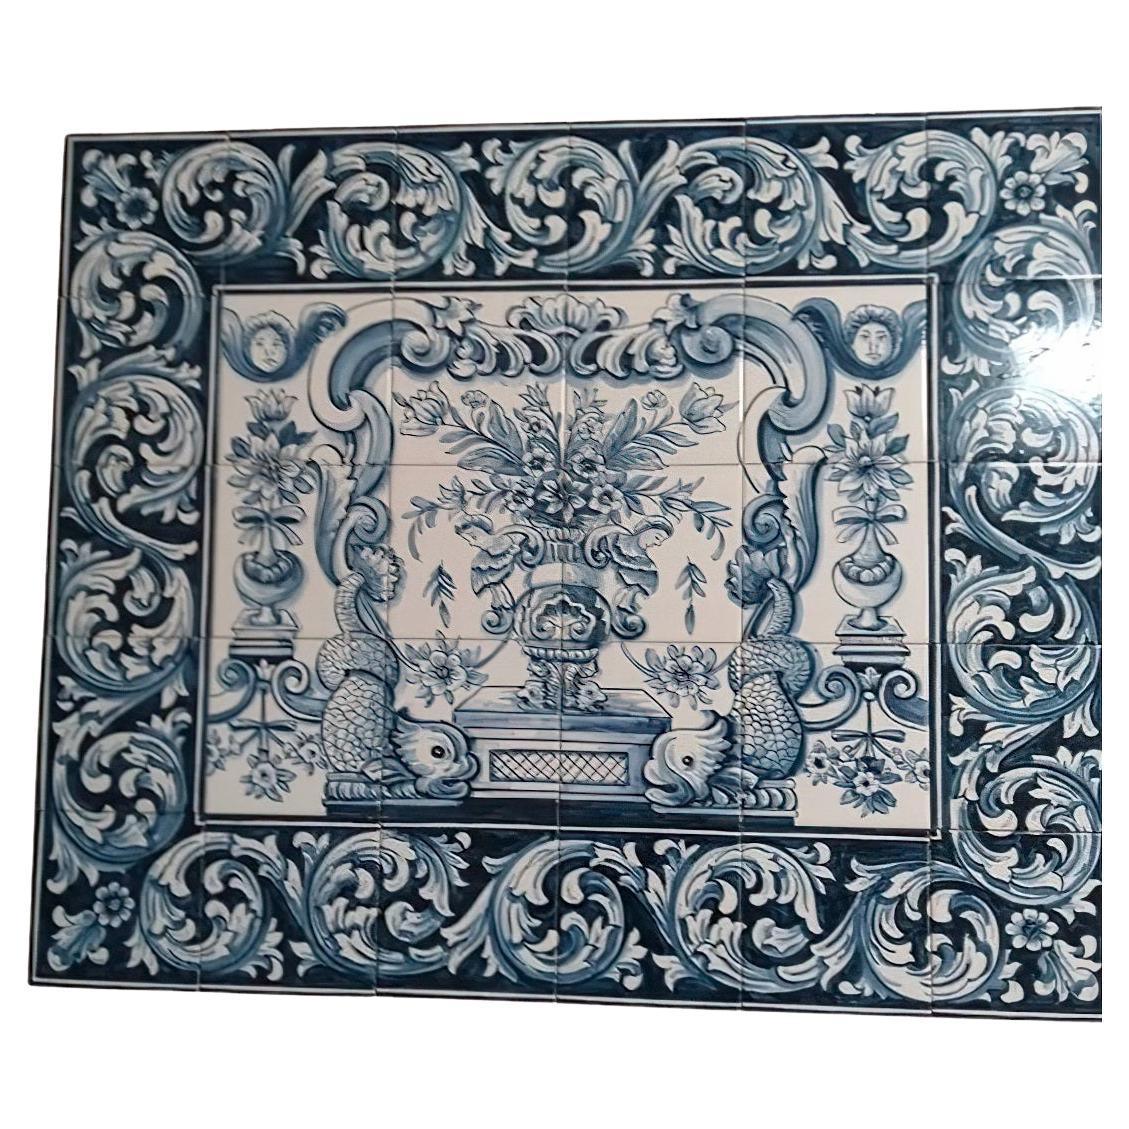 Azulejos Portuguese Hand Painted Tile Mural "Albarrada" Signed by Artist For Sale